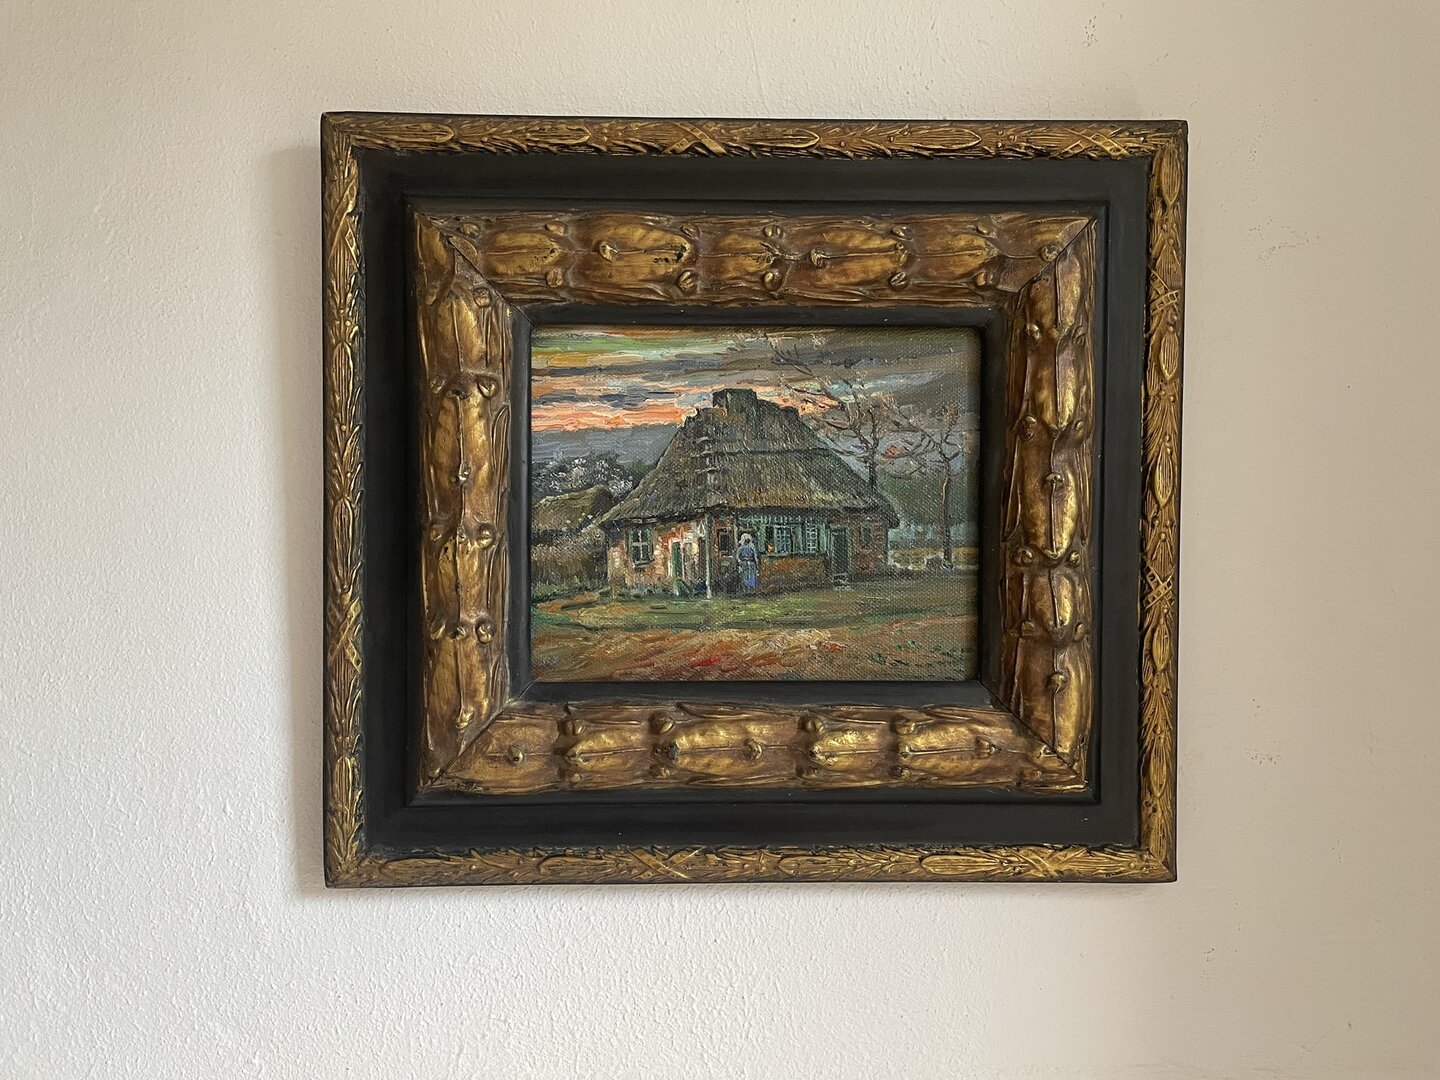 small replica of Van Gogh's Cottage with vintage frame